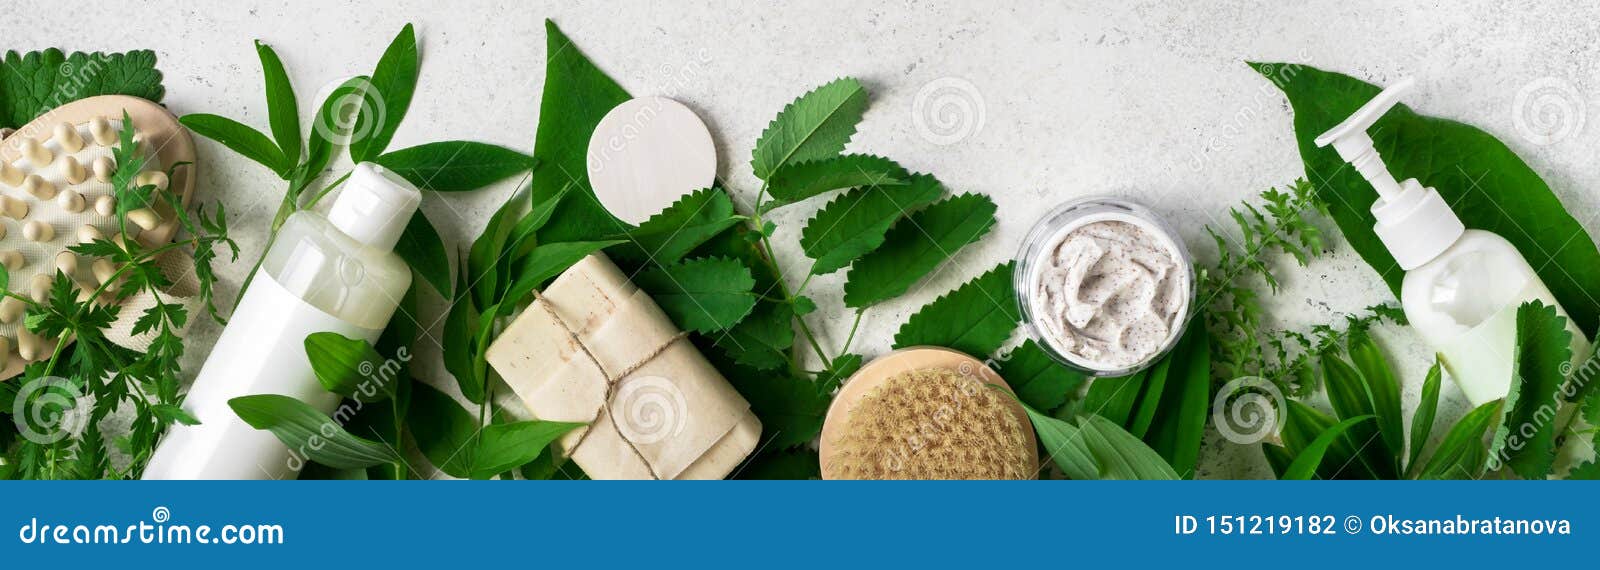 natural skincare and leaves